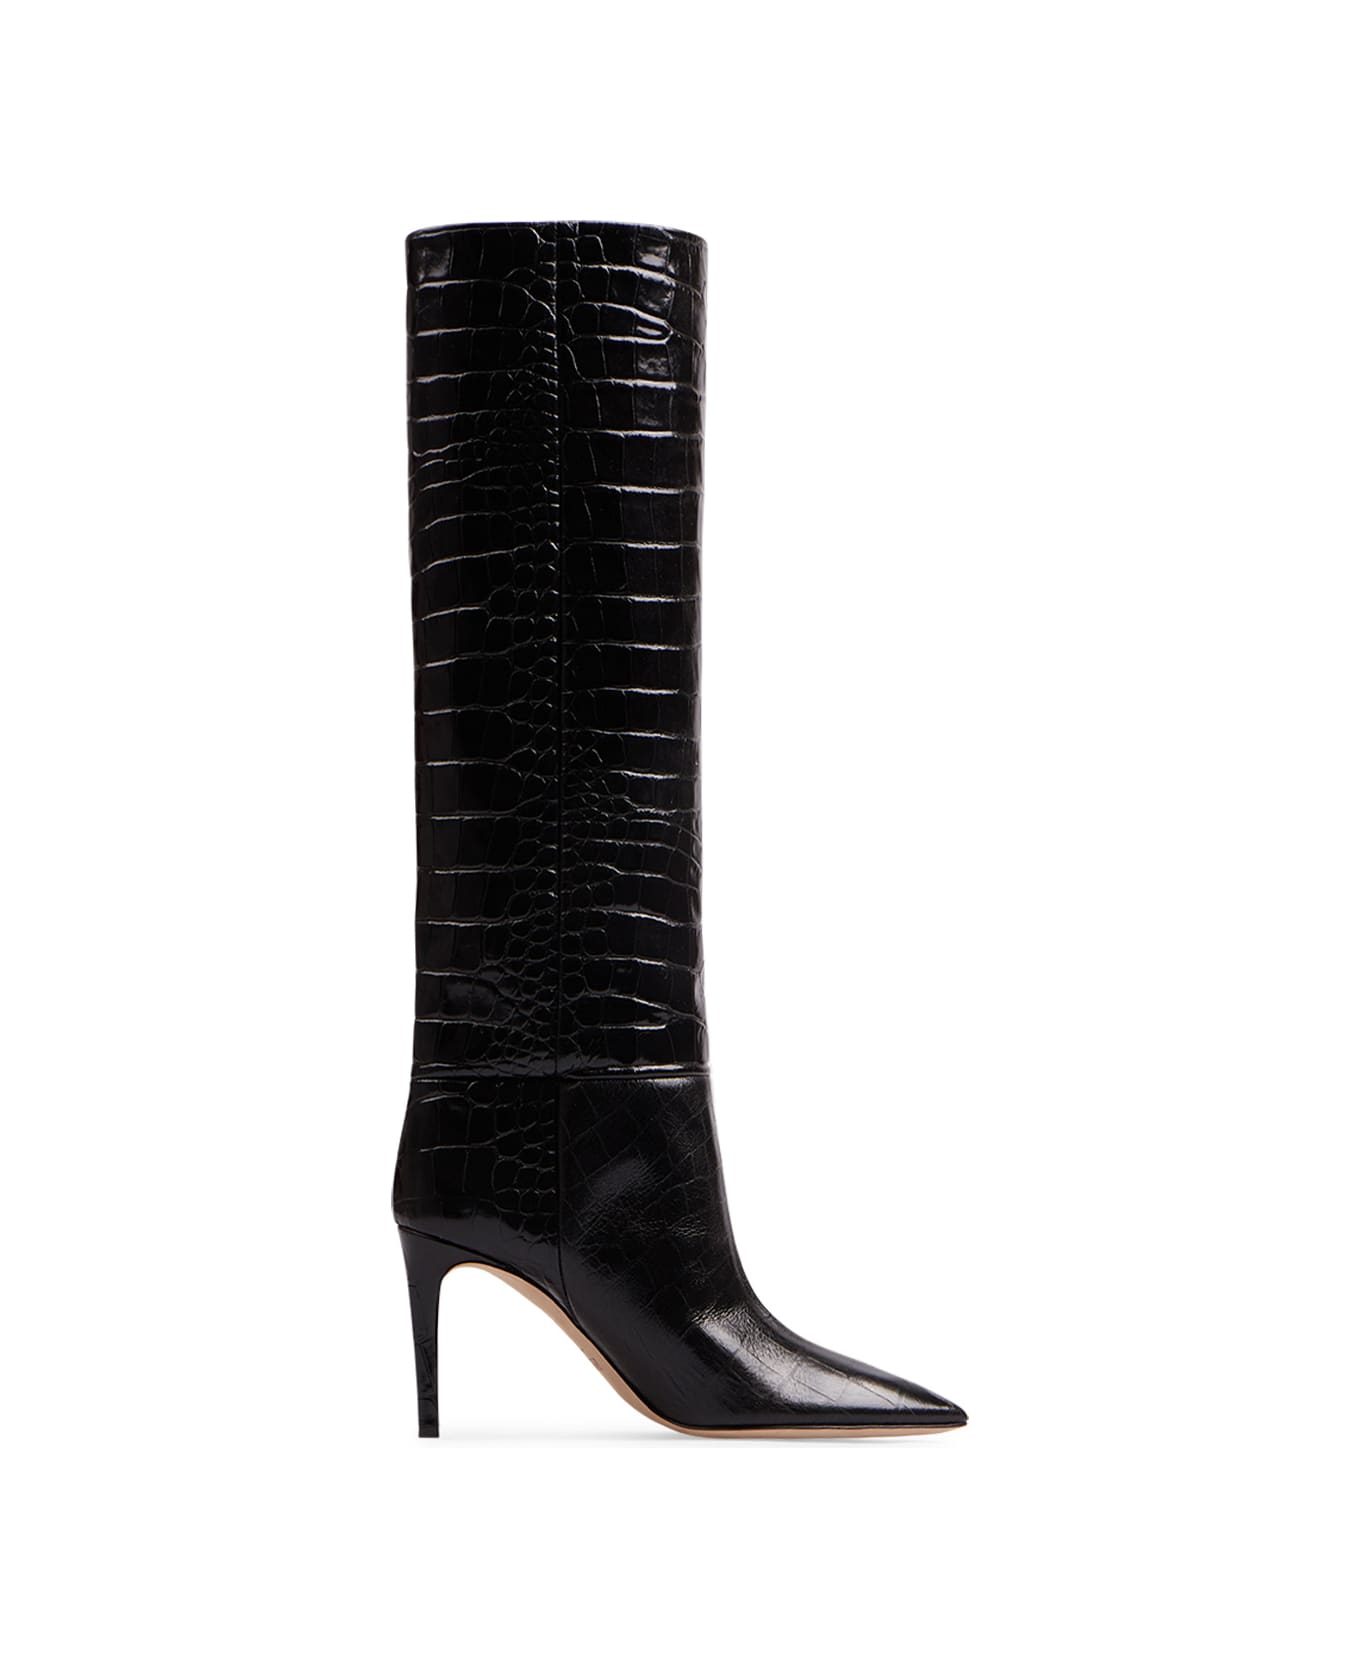 Paris Texas Charcoal Leather Stiletto Boots With Crocodile Print - Carbone ブーツ